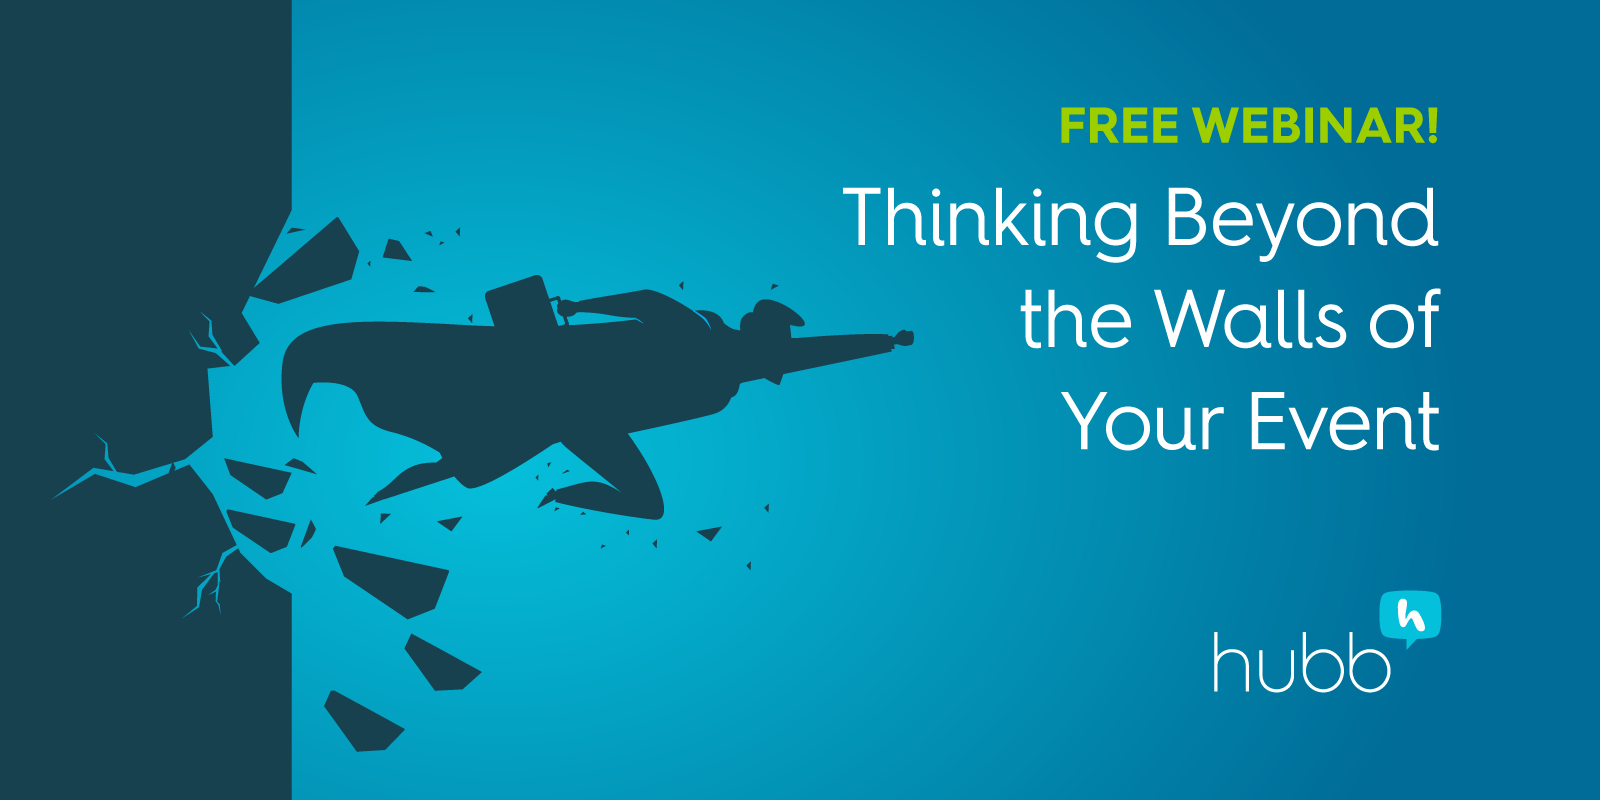 [Webinar] Thinking Beyond the Walls of Your Event